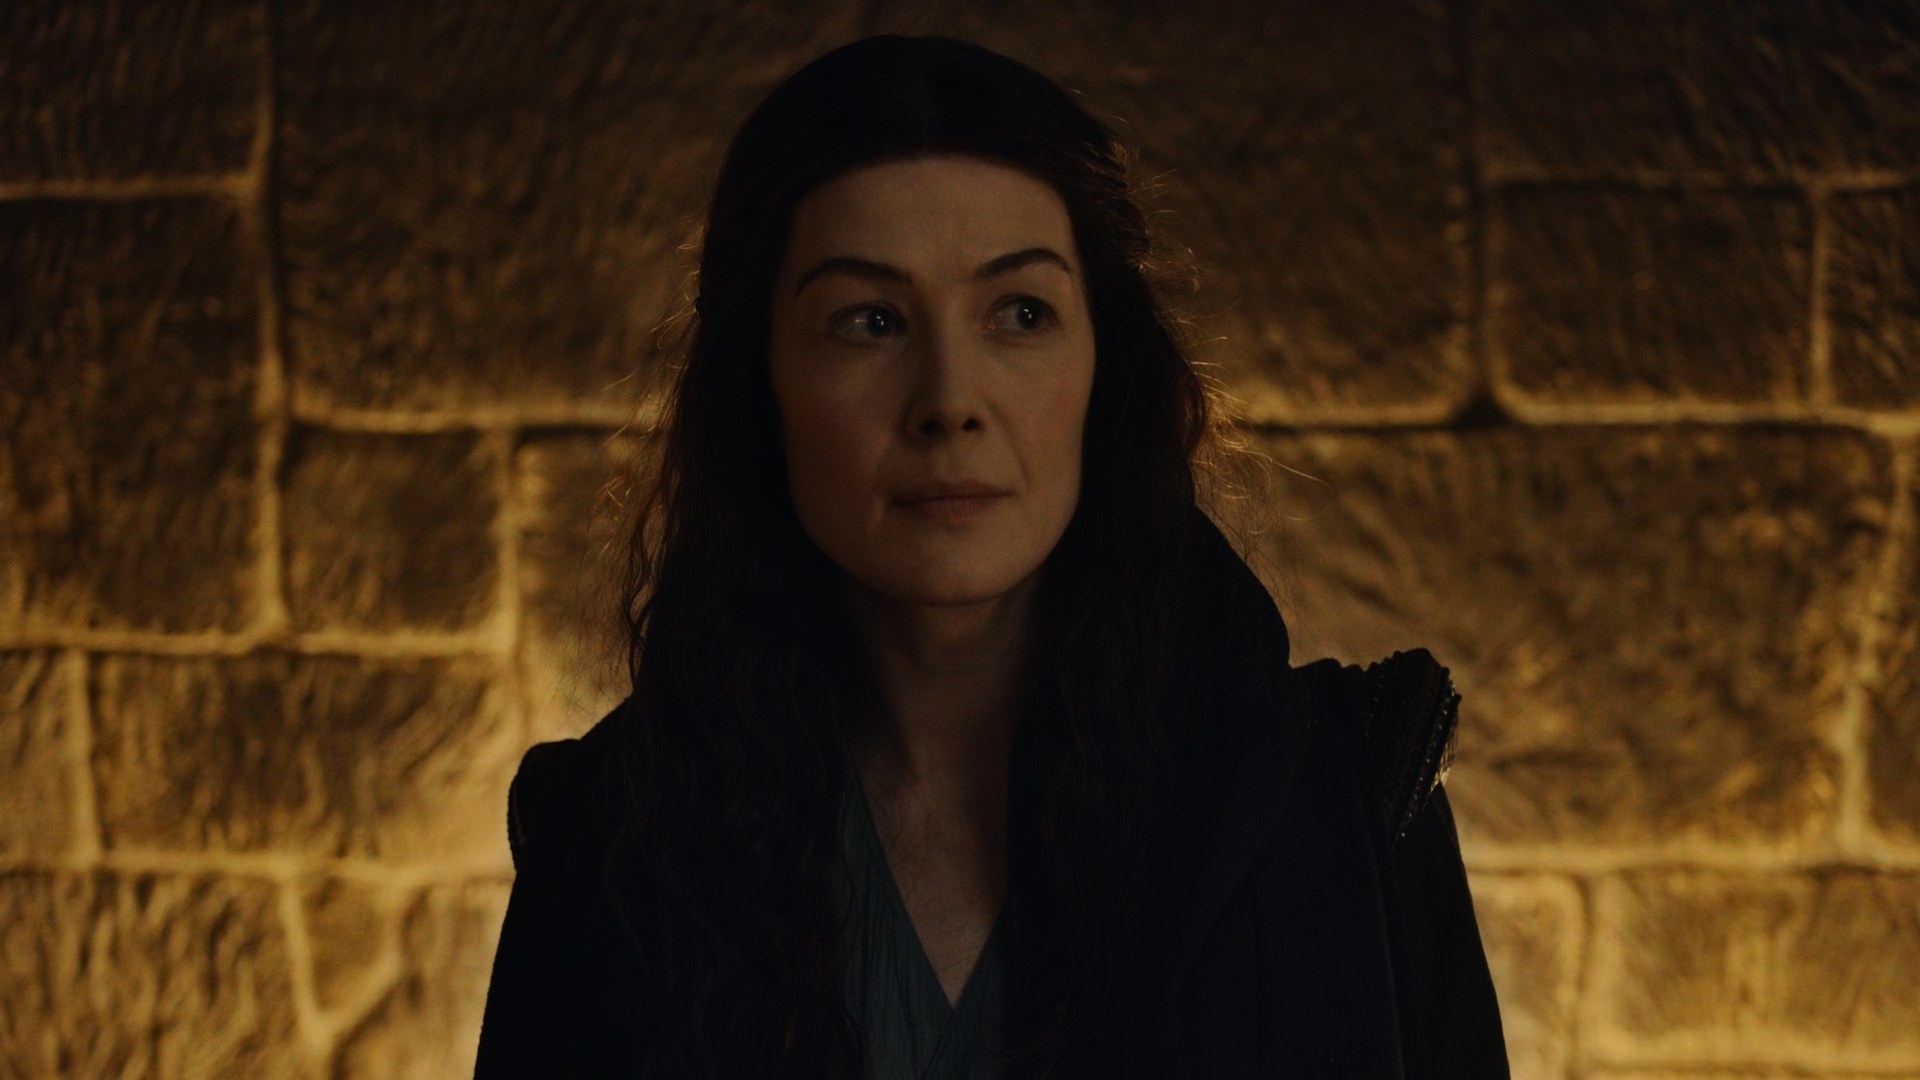 A shot of Moiraine Sedai’s (Rosamund Pike) face in the Winespring Inn, lit from behind by a large hearth